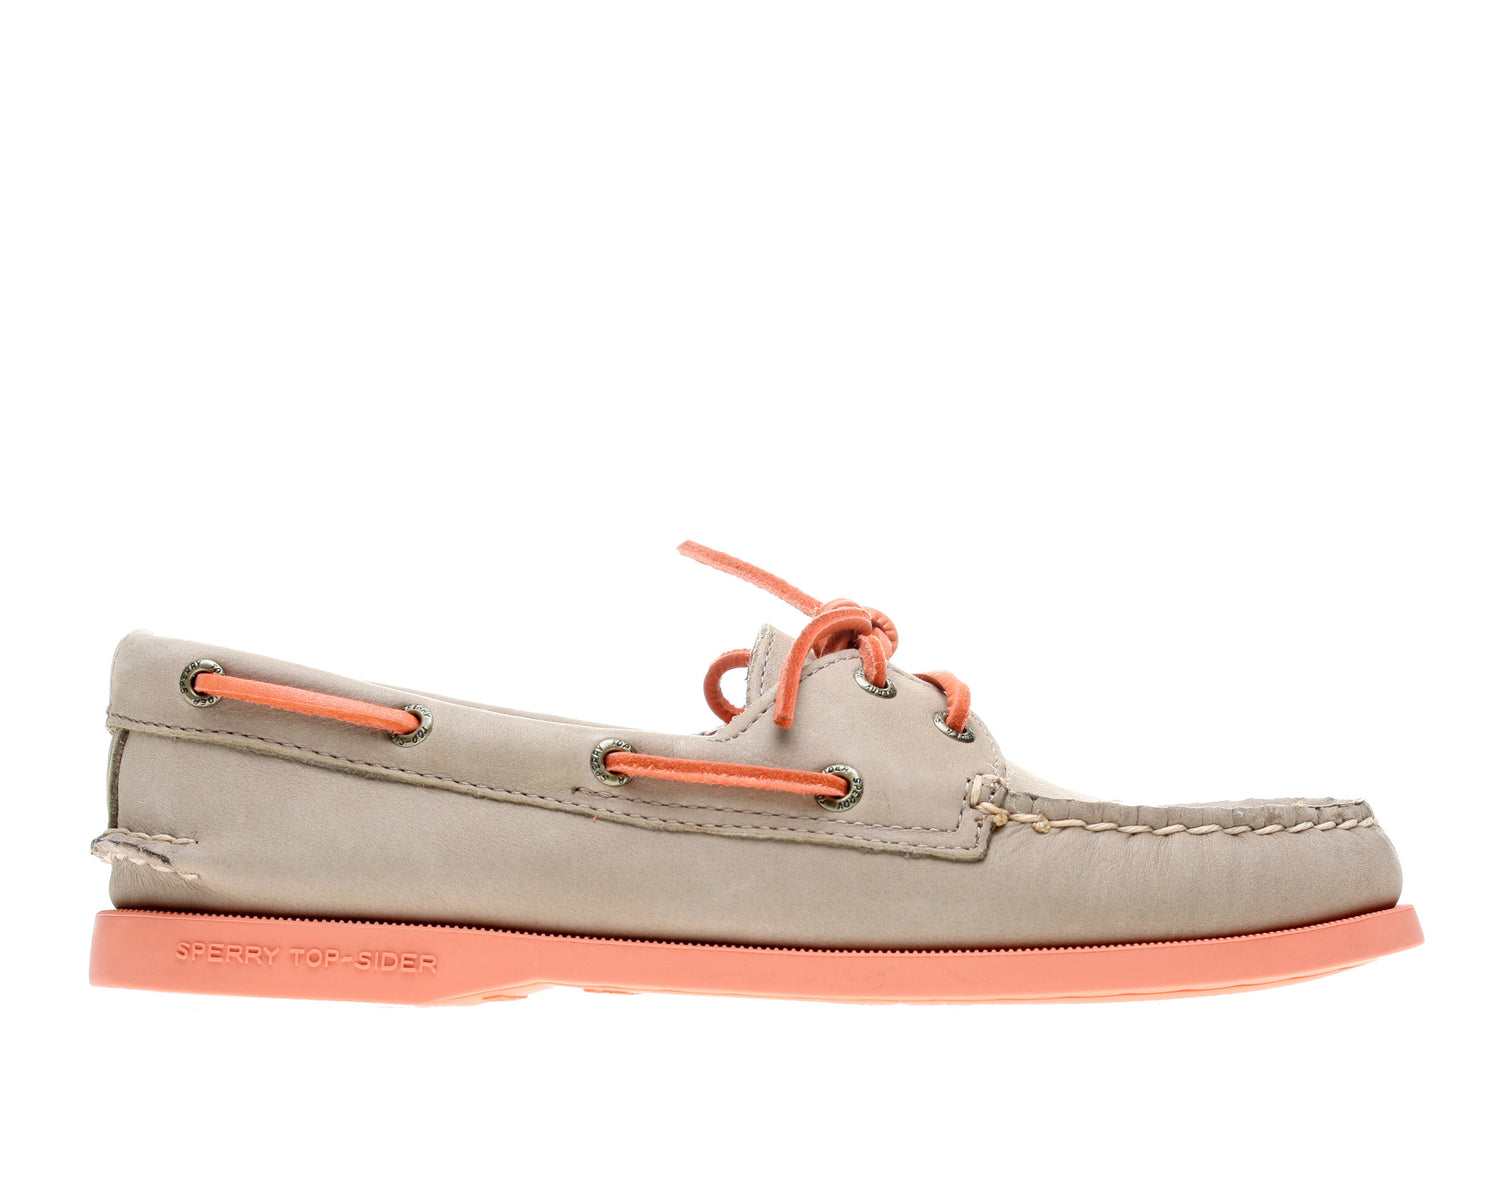 Sperry Top Sider Authentic Original Women's 2-Eye Boat Shoes